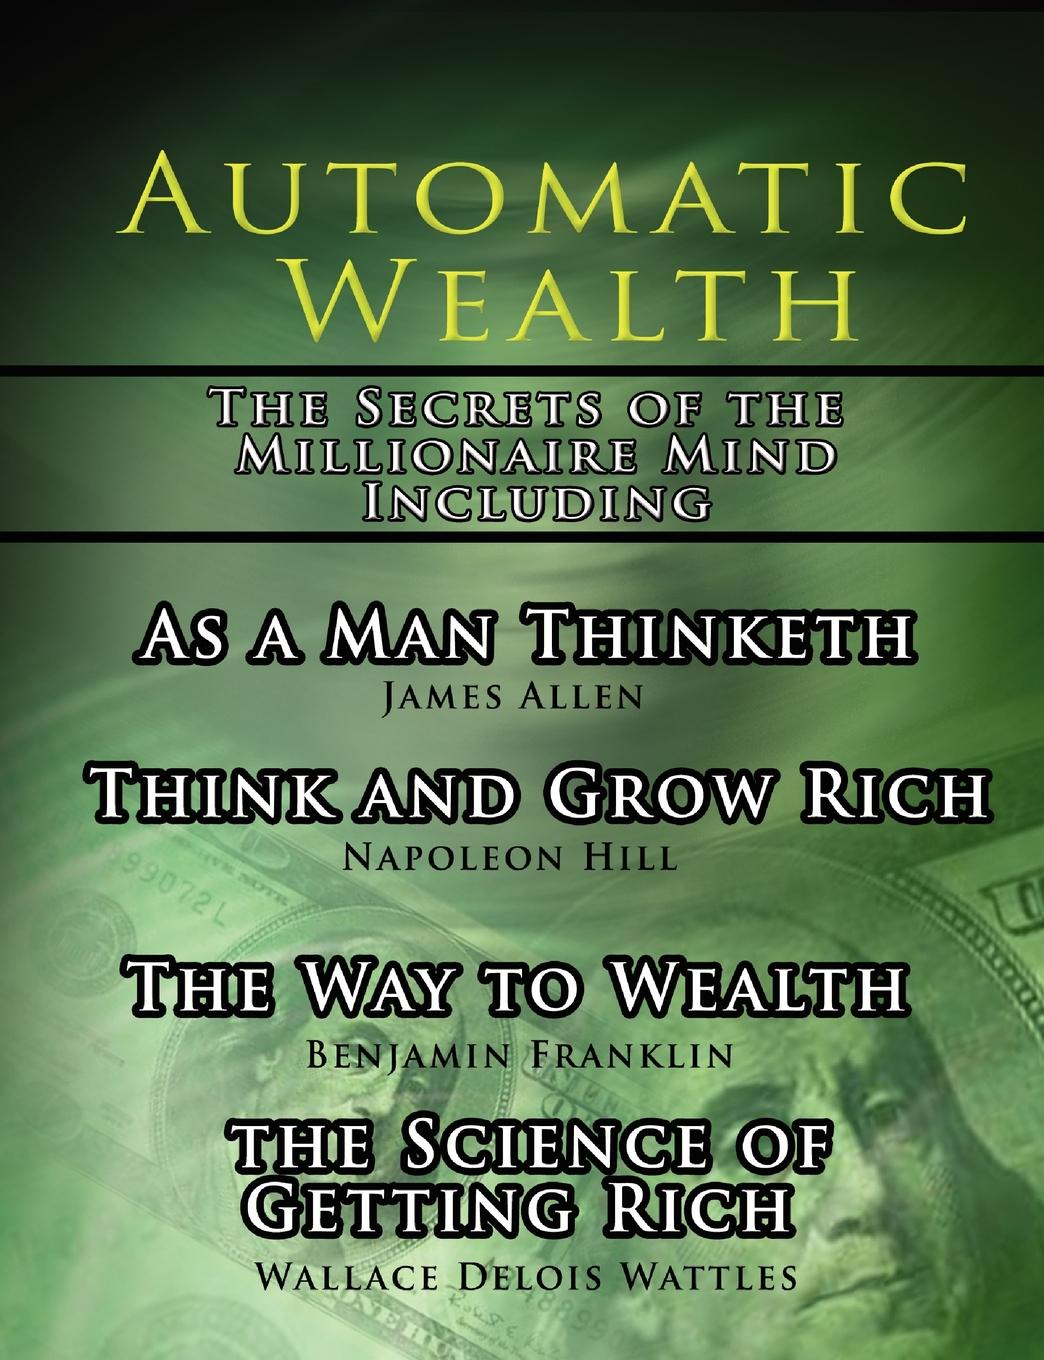 Automatic Wealth, The Secrets of the Millionaire Mind-Including. As a Man Thinketh, The Science of Getting Rich, The Way to Wealth and Think and Grow Rich